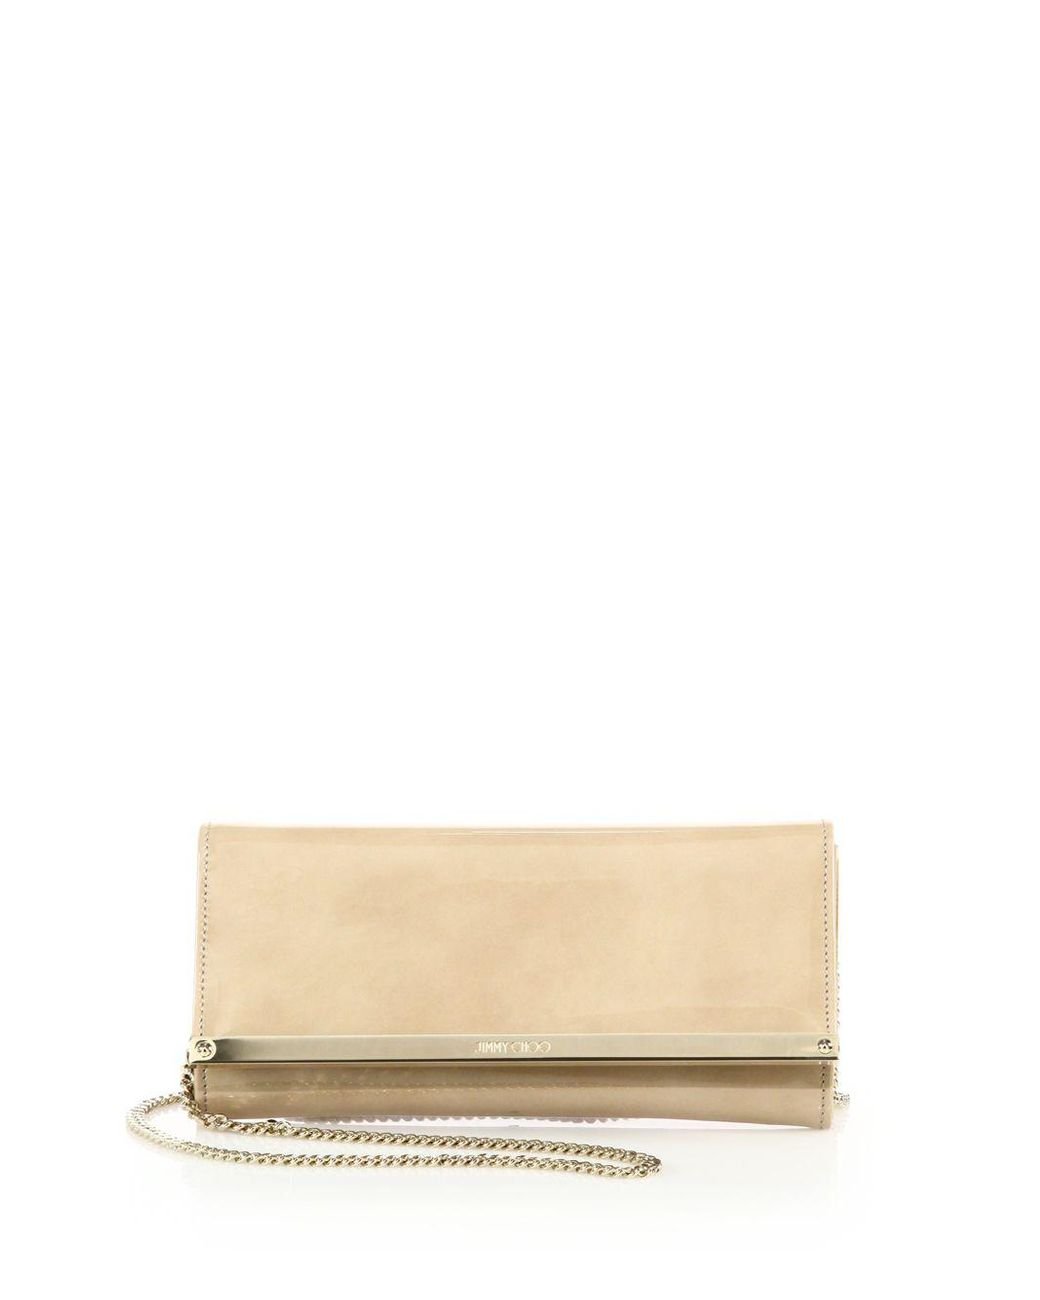 Jimmy Choo Milla Patent Leather & Suede Clutch in Natural | Lyst